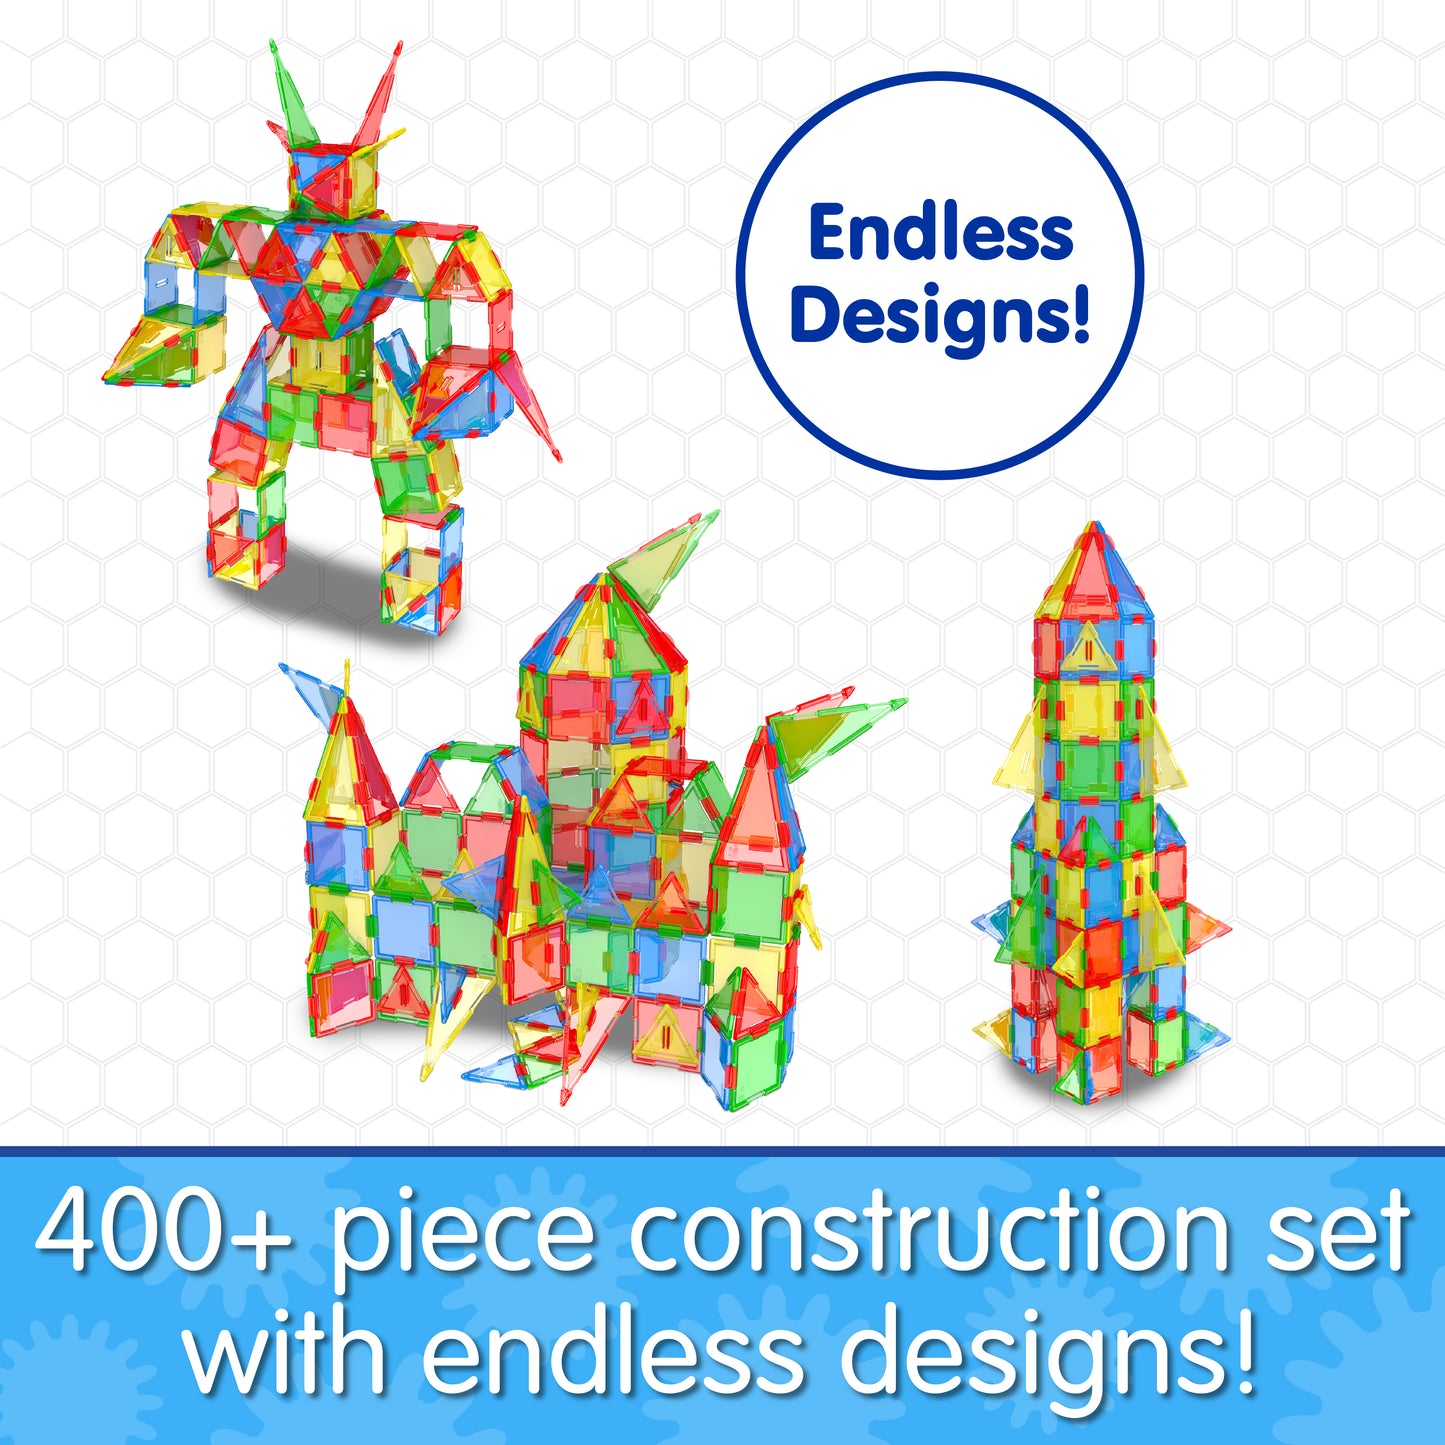 Infographic about Techno Tiles Super Set that says, "400+ piece construction set with endless designs!"